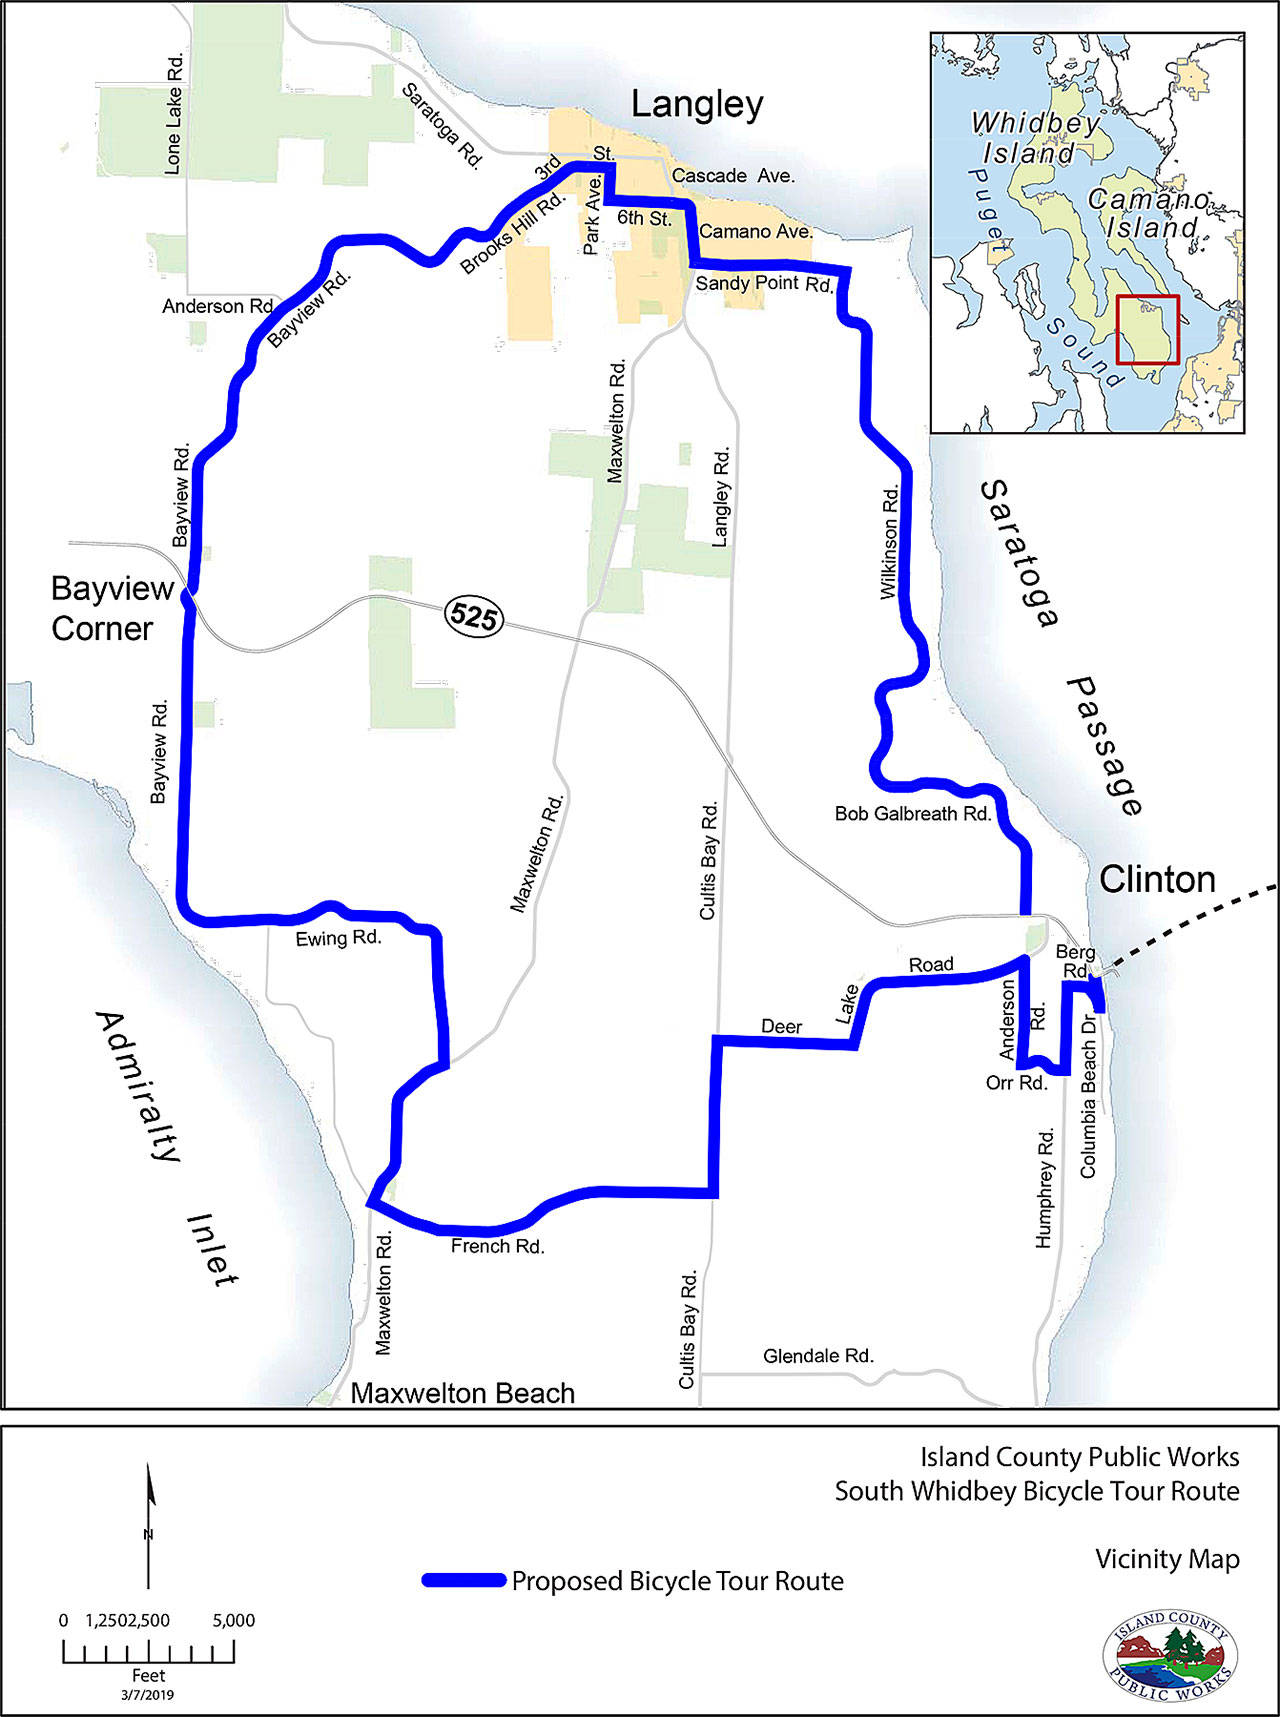 The proposed route. Image provided by Island Count Public Works